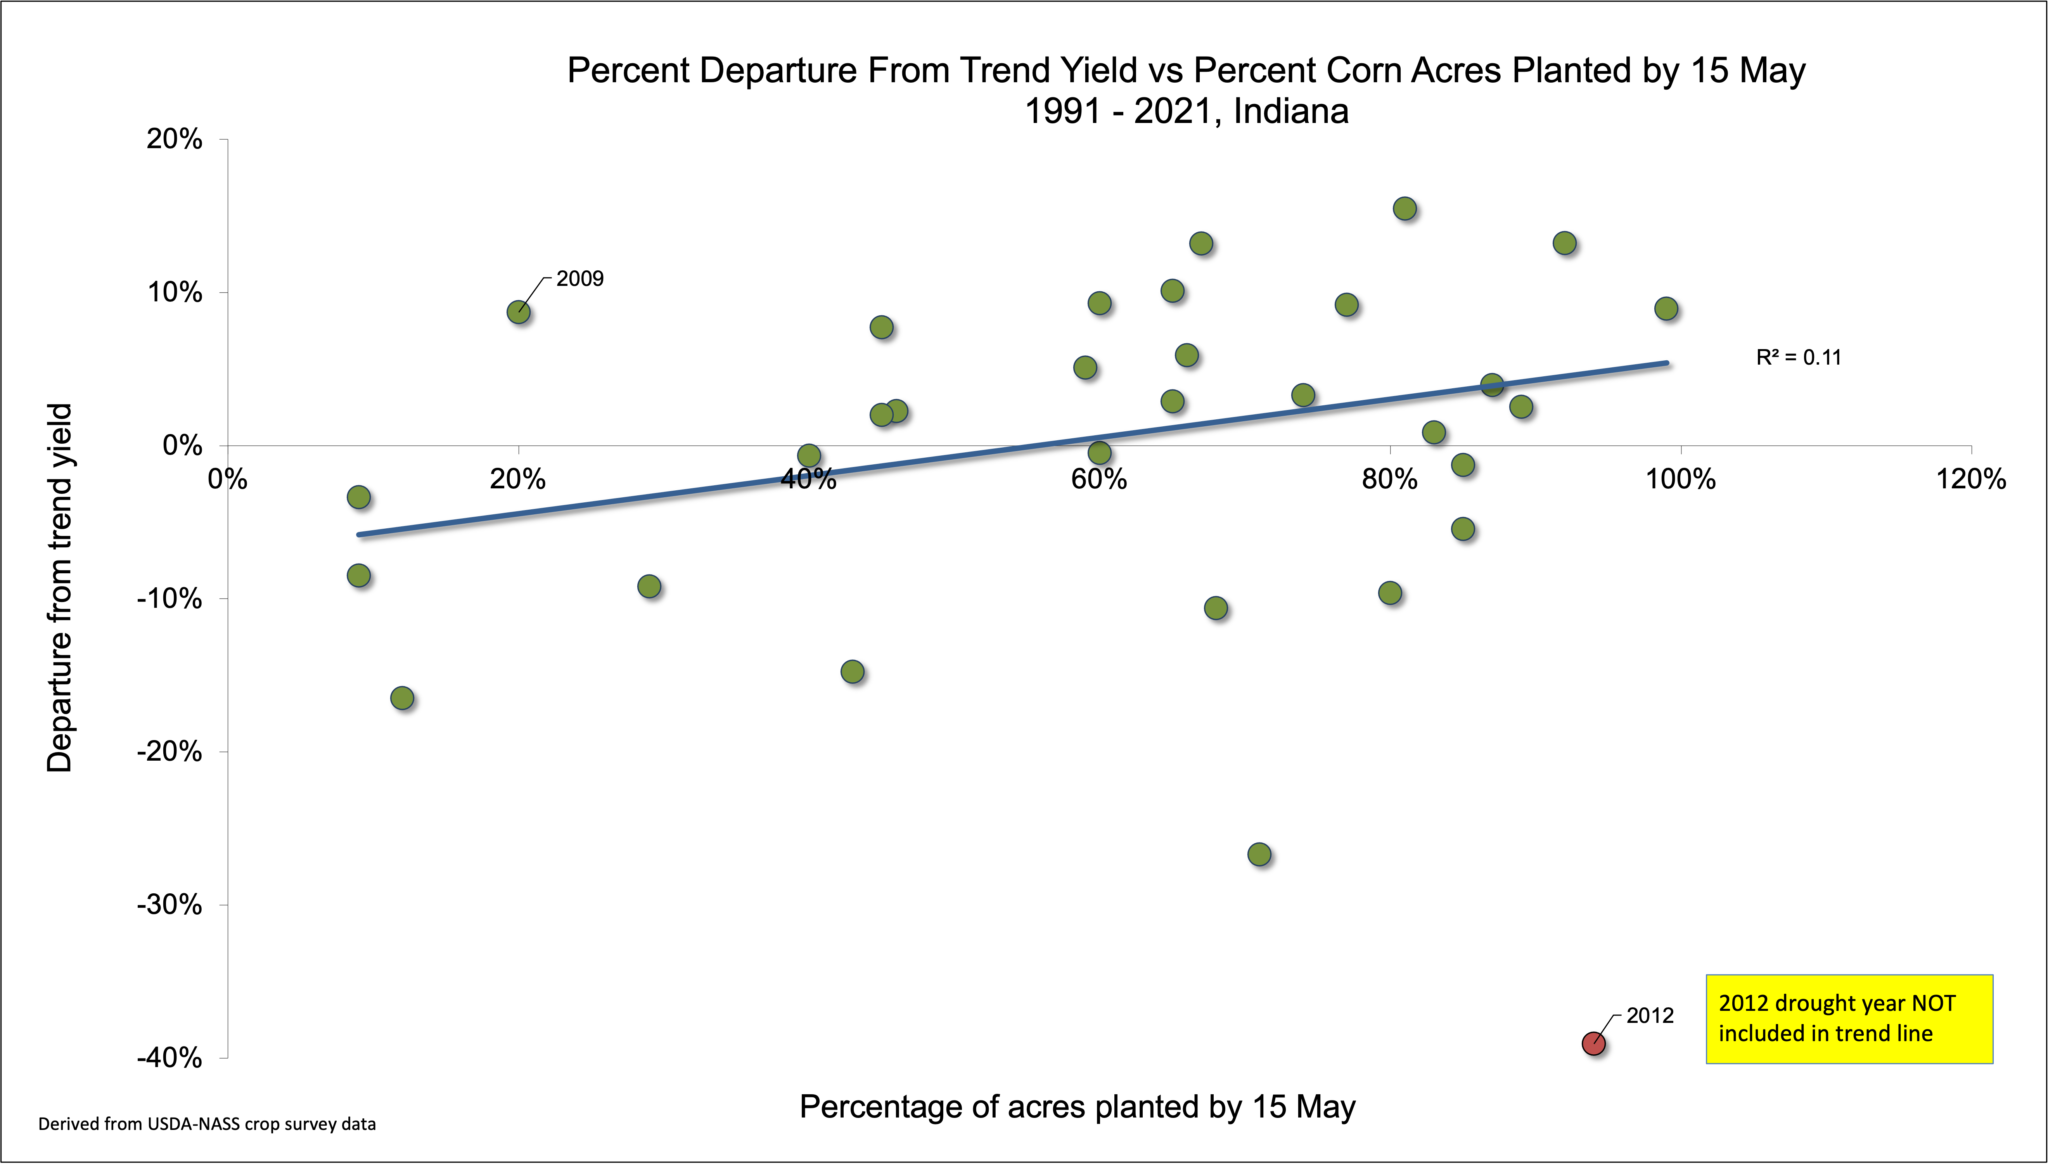 Fig. 2. Percent departure from statewide trend yield versus percent of corn acres planted by May 15 in Indiana, 1991 - 2021. Data derived from USDA-NASS crop survey data. 